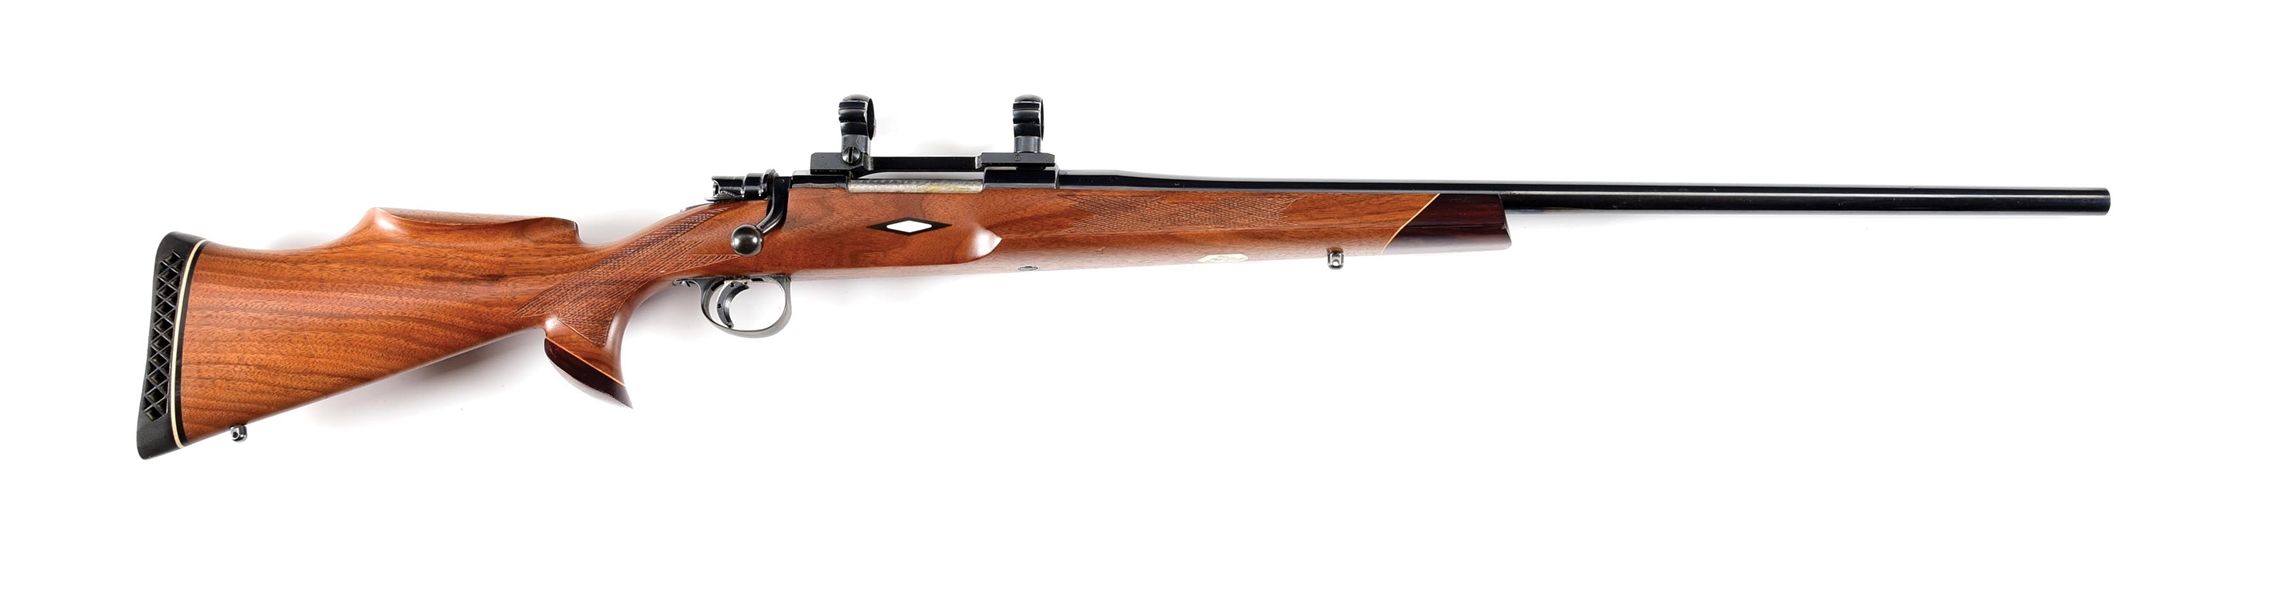 (M) WINSLOW ARMS FN MAUSER BOLT ACTION RIFLE IN 7MM REMINGTON MAGNUM.